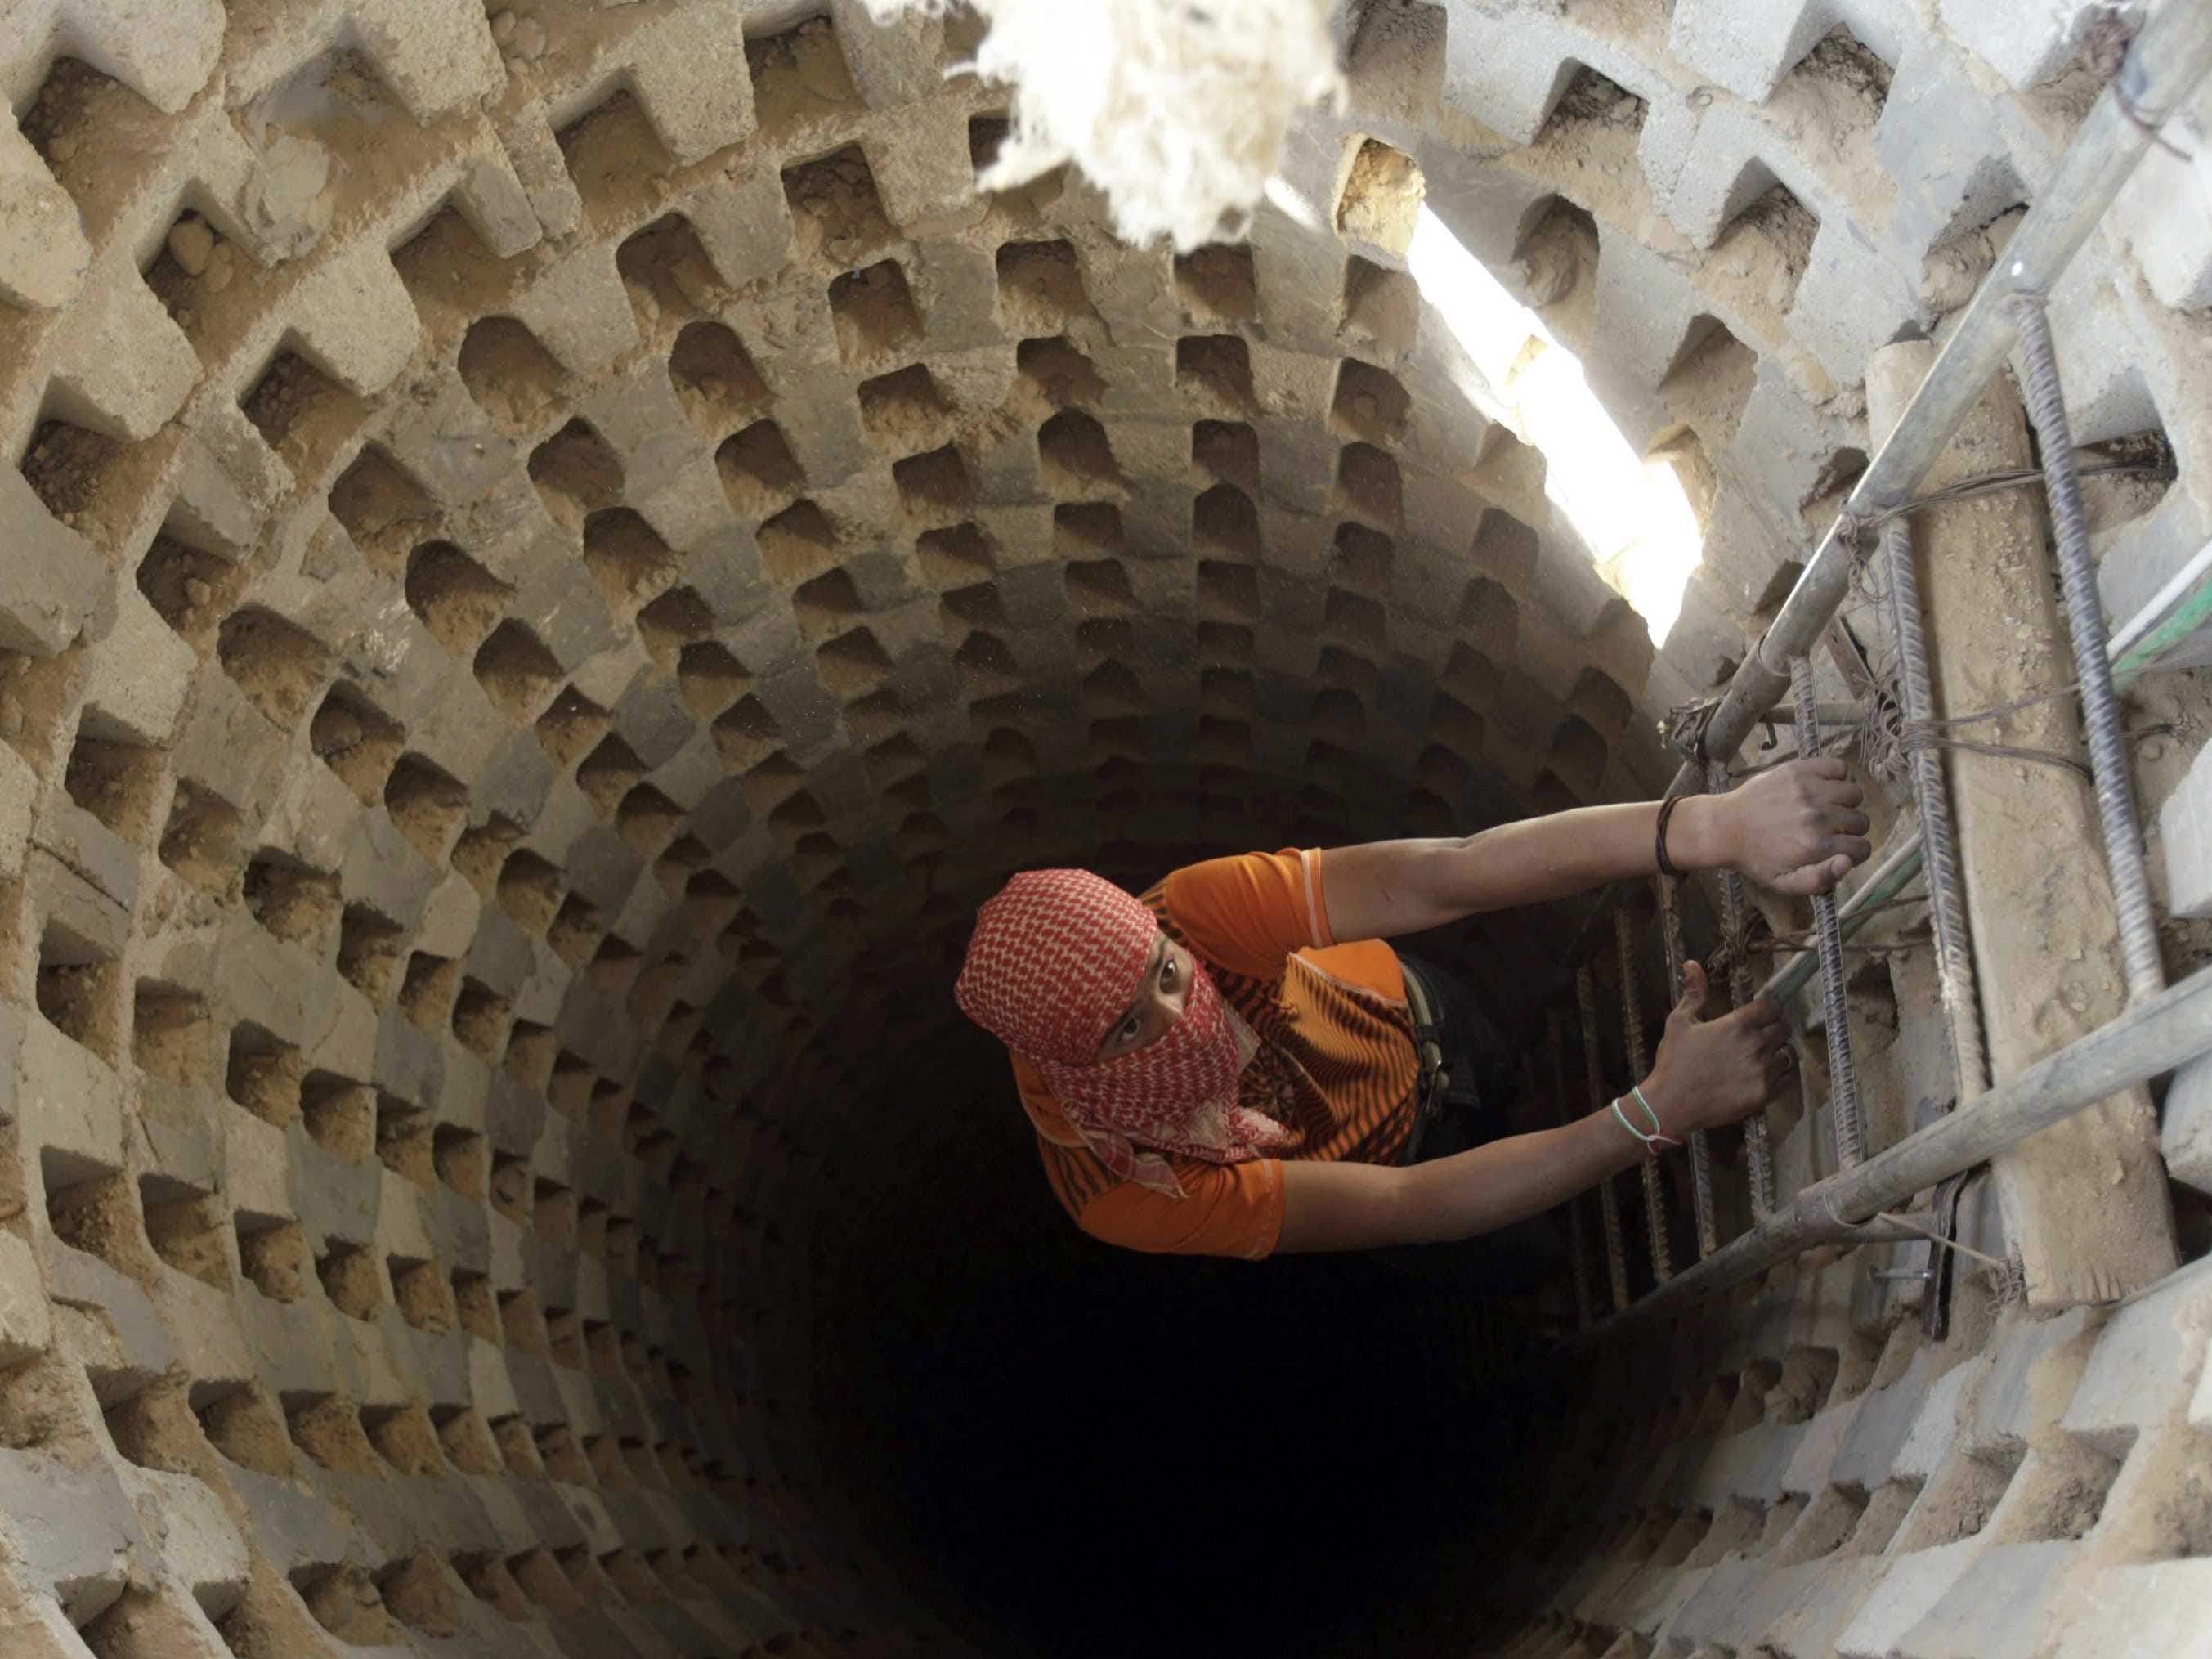 israel-wants-to-destroy-these-elaborate-tunnels-in-gaza.jpg